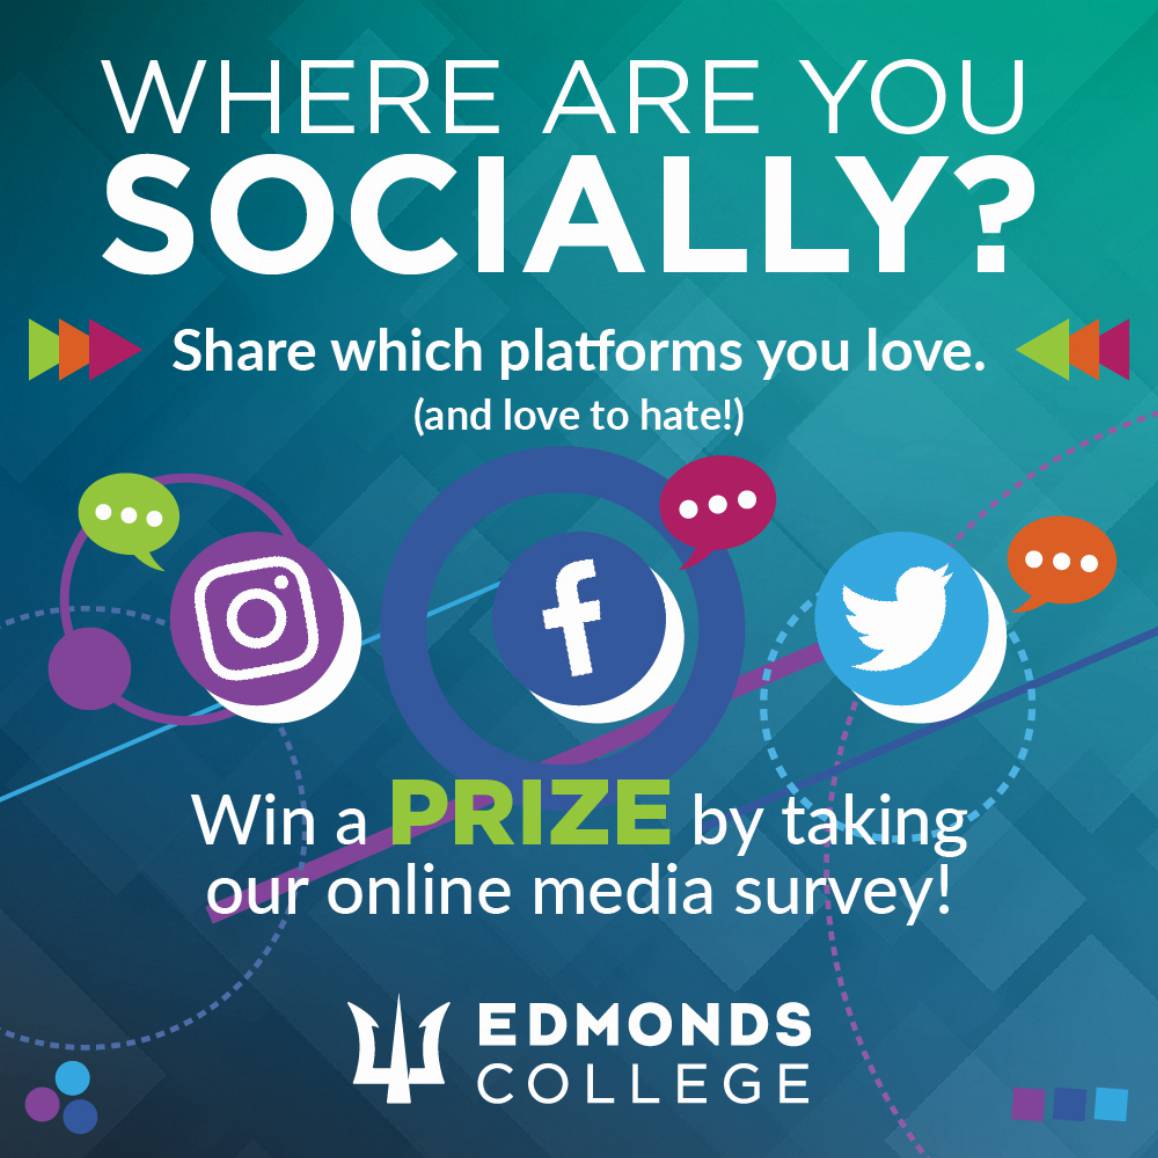 Where are you socially? Take our survey and get a chance at winning a prize.